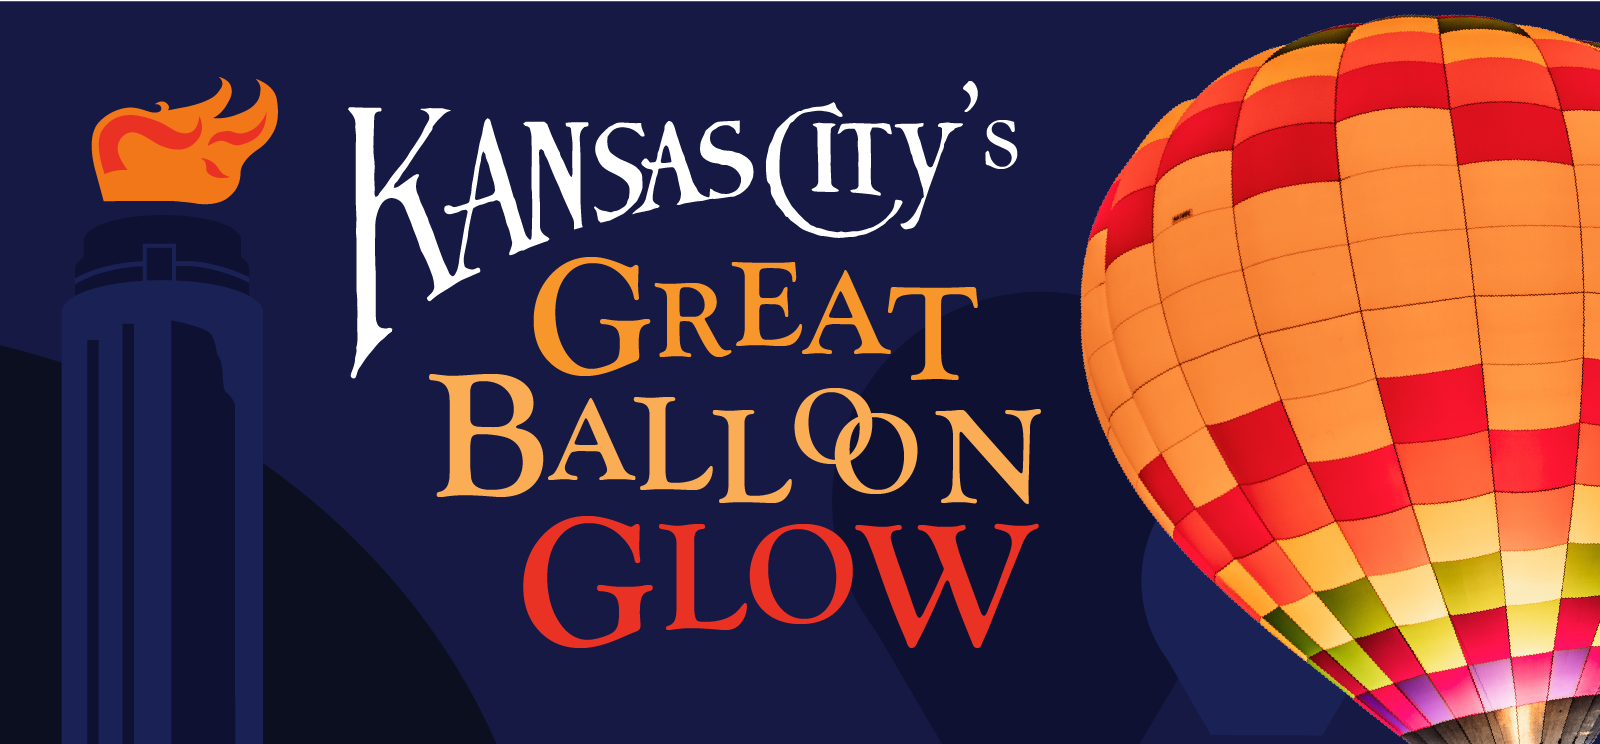 Image: A lit-up hot air balloon next to a graphic of the Liberty Memorial Tower. Text: Kansas City's Great Balloon Glow